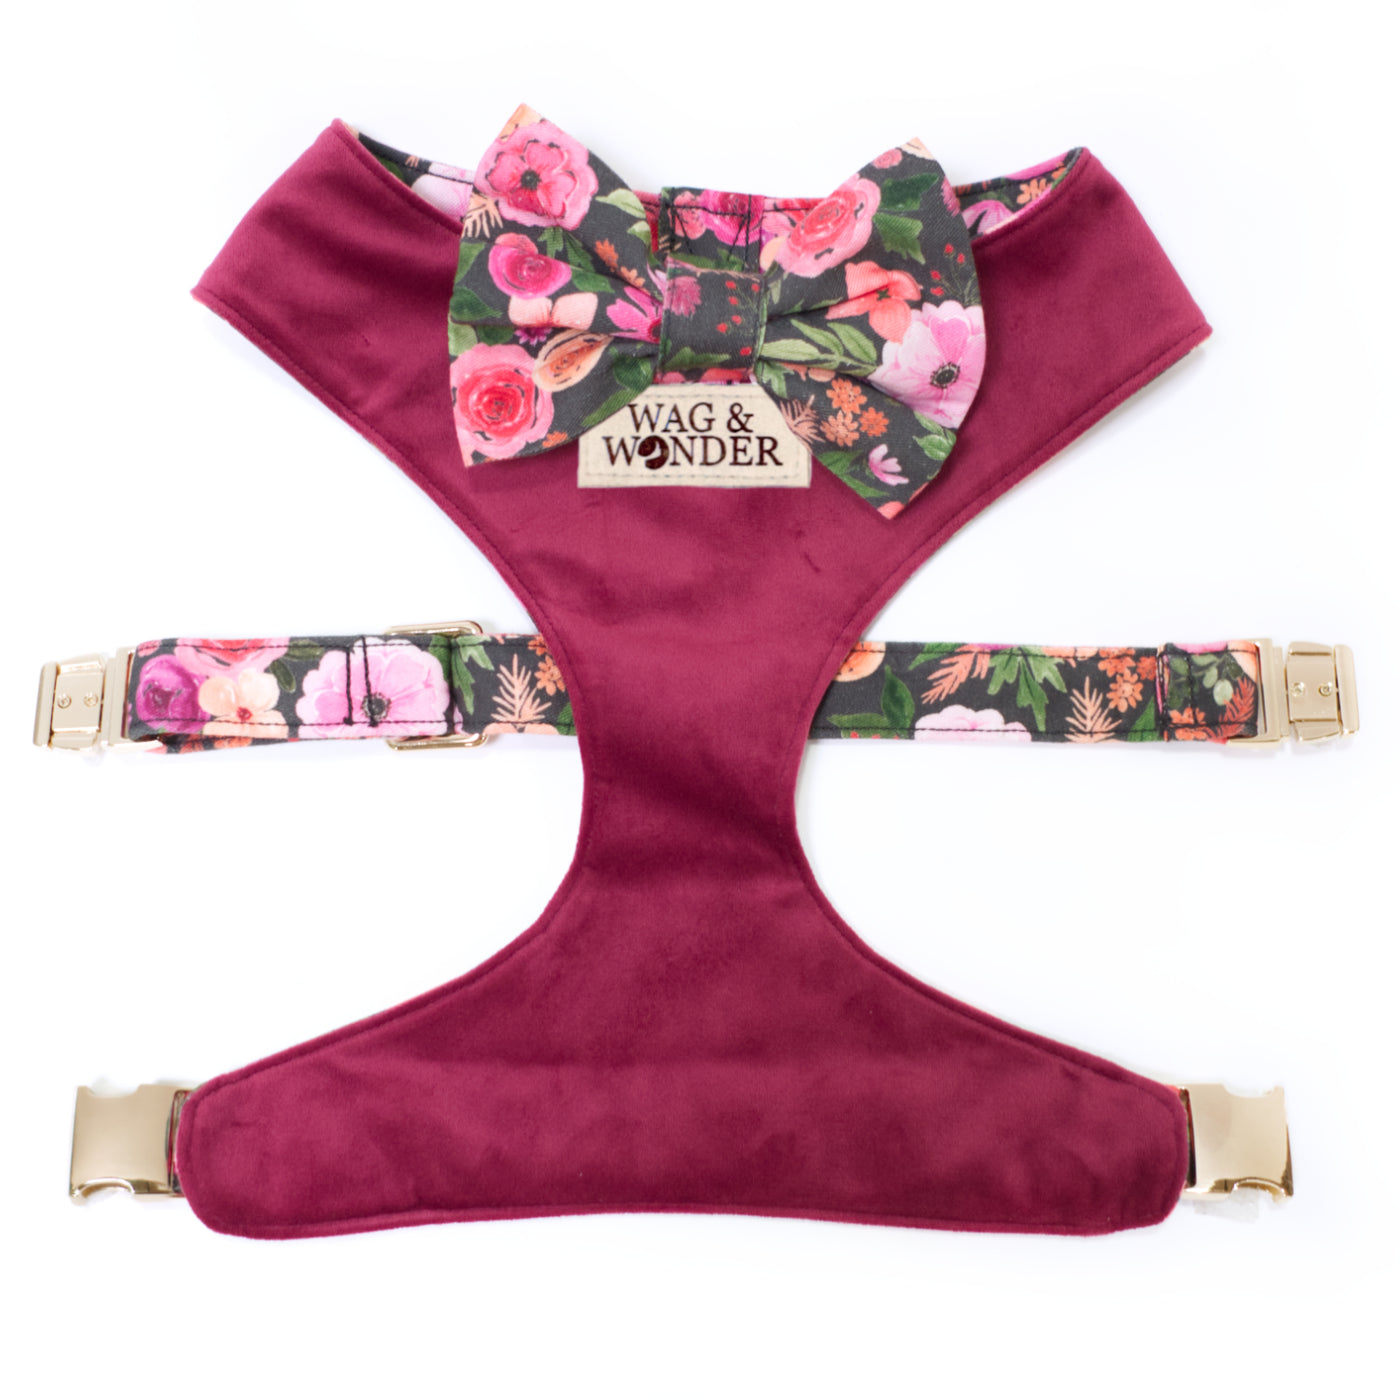 Wine velvet reversible dog harness with gold hardware and pink floral dog bow tie